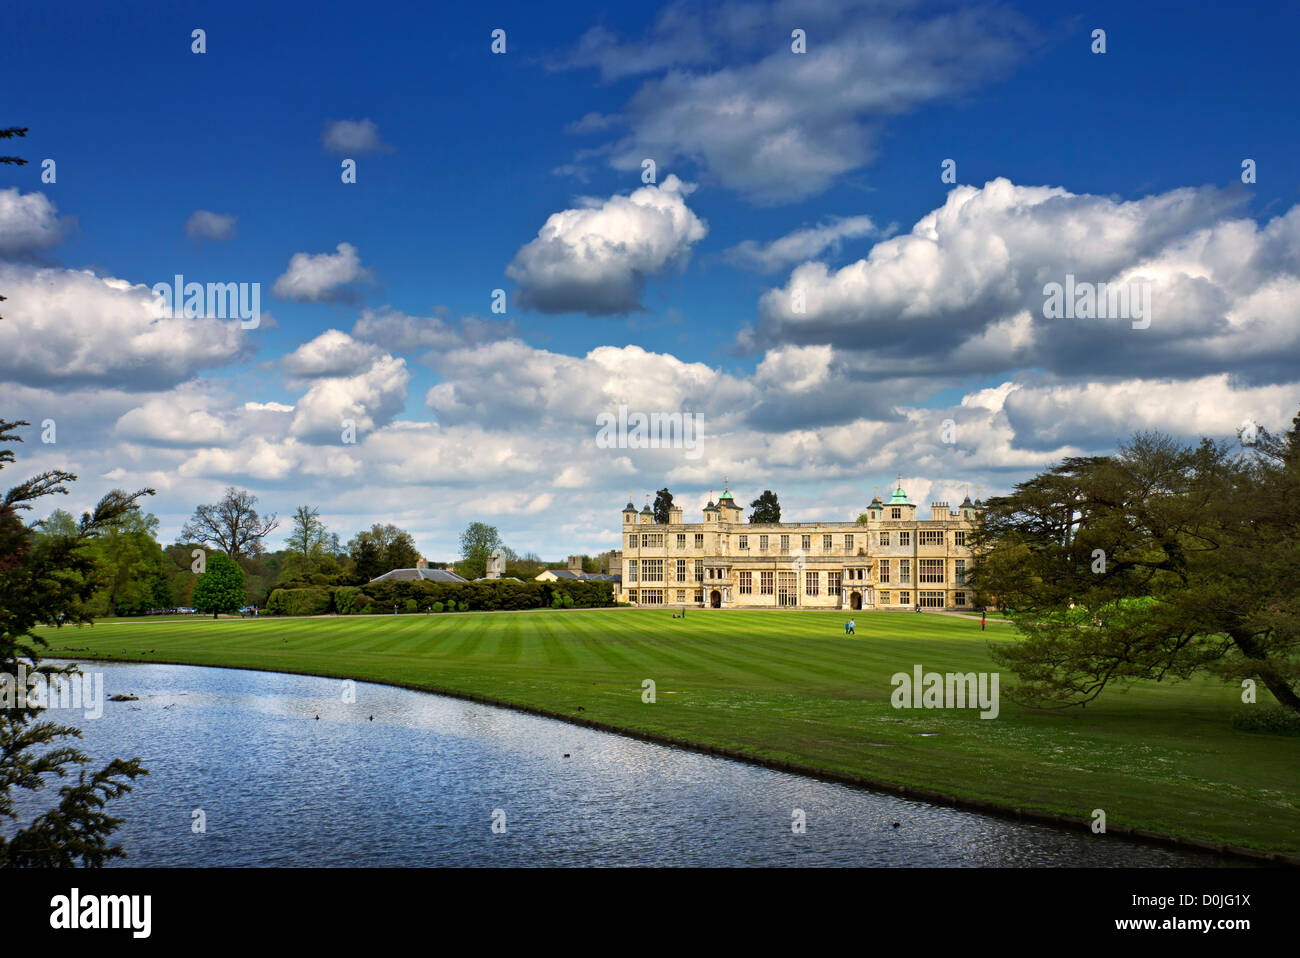 Distant view of the early 17th-century country house at Audley End. Stock Photo